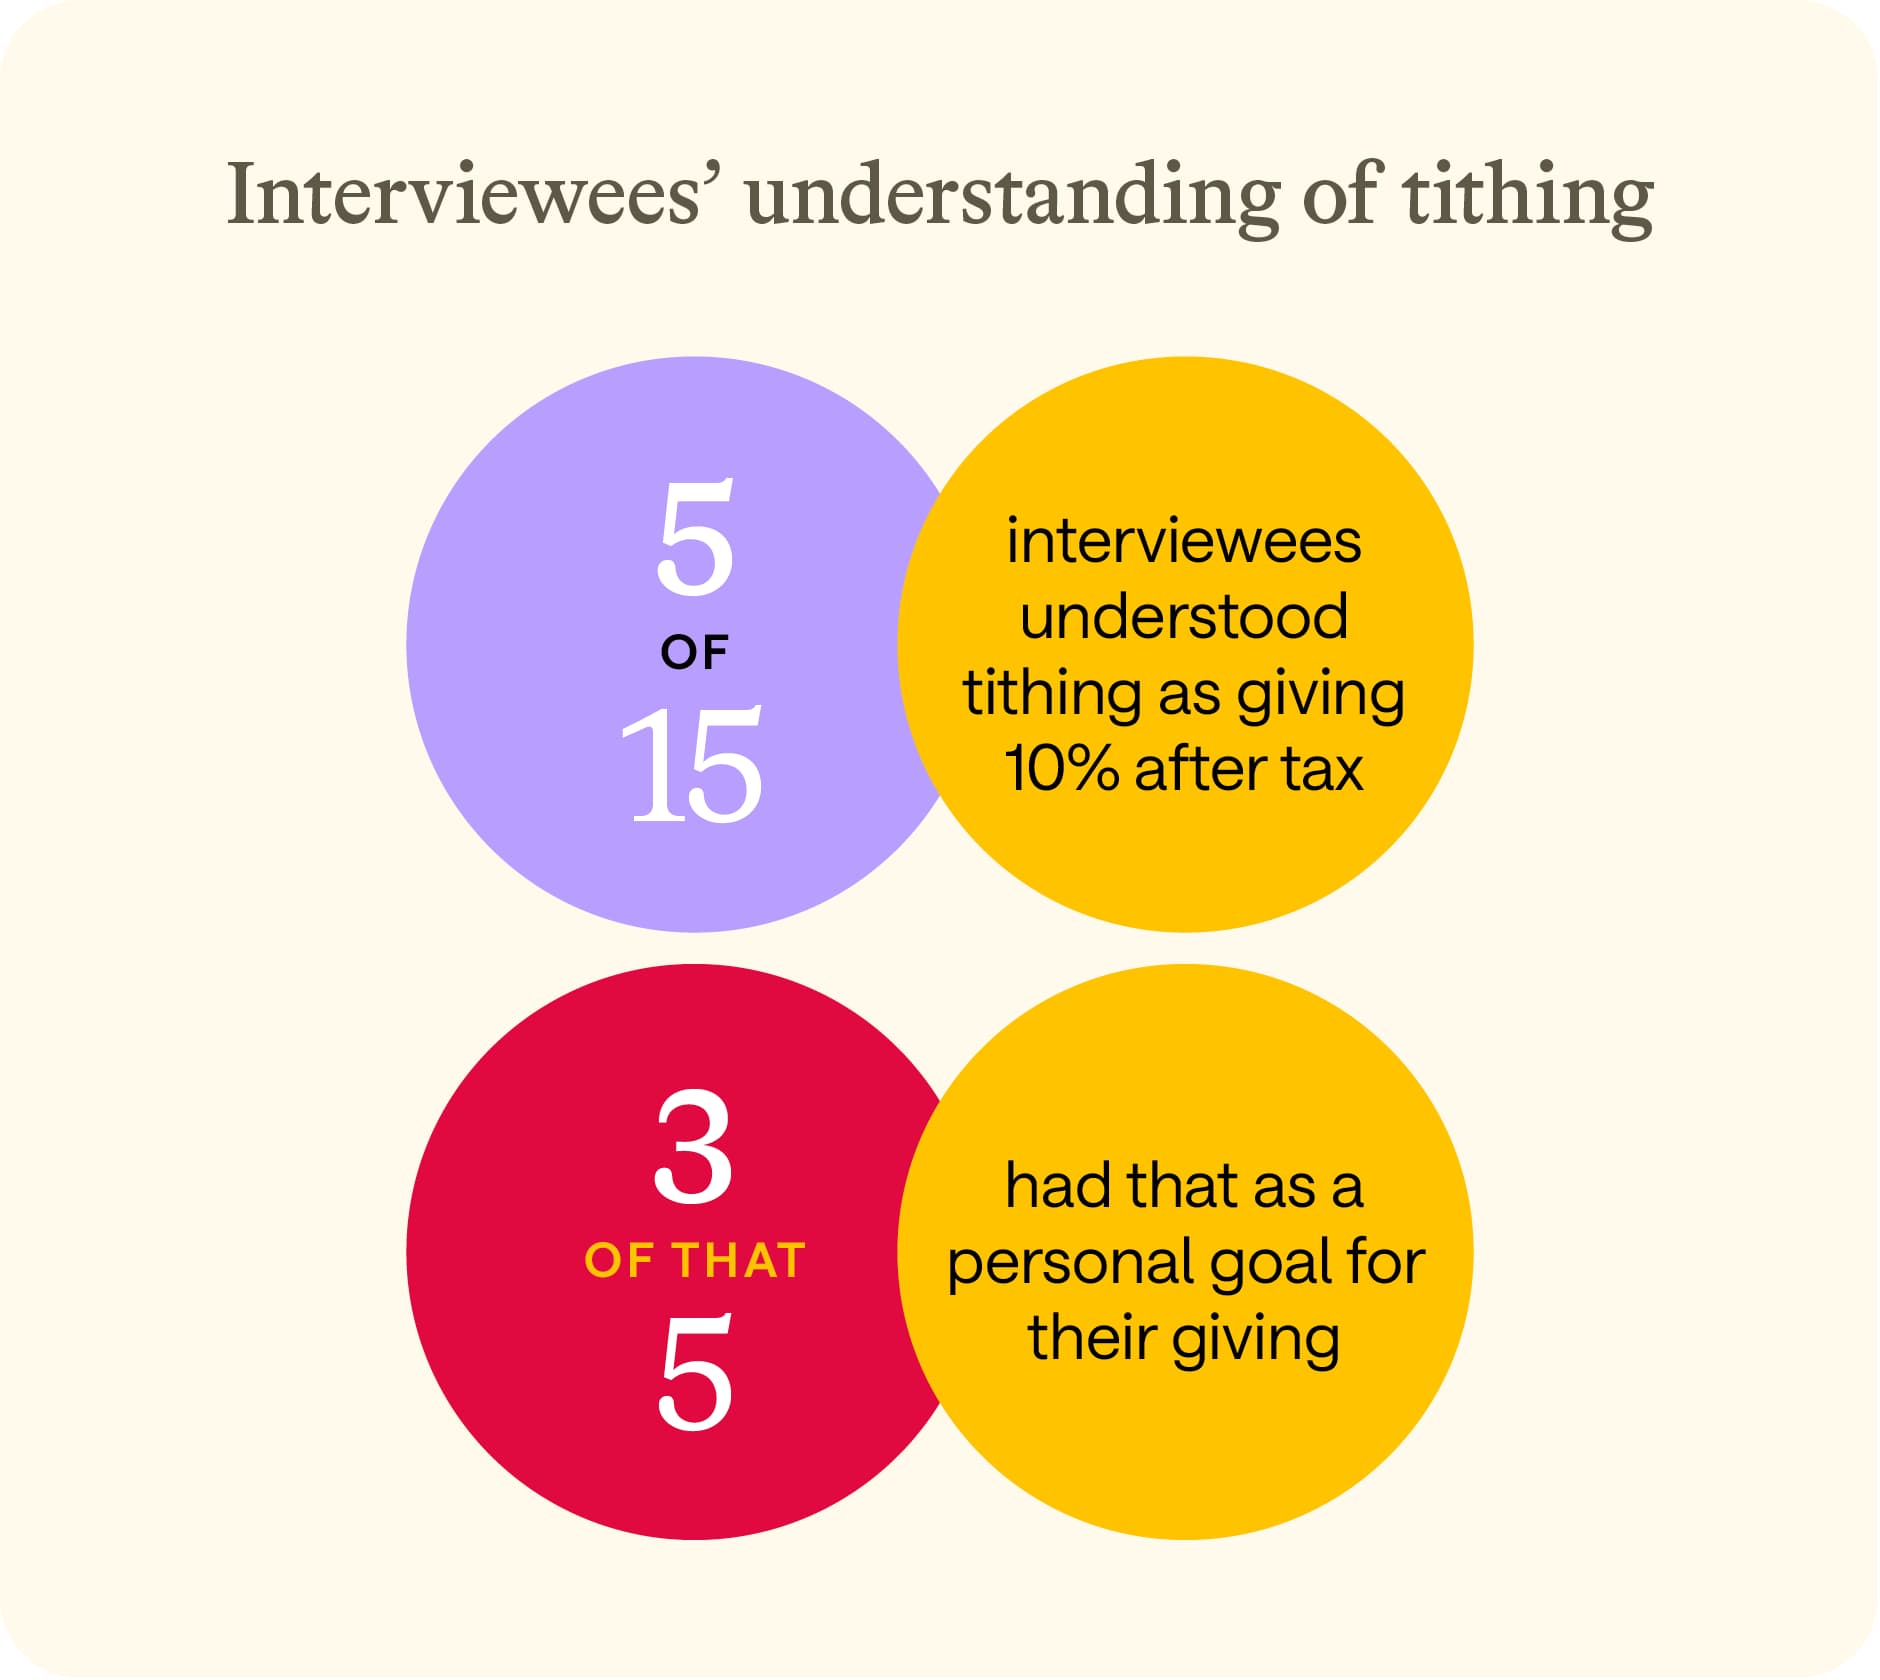 Graph to show interviewees' understanding of tithing